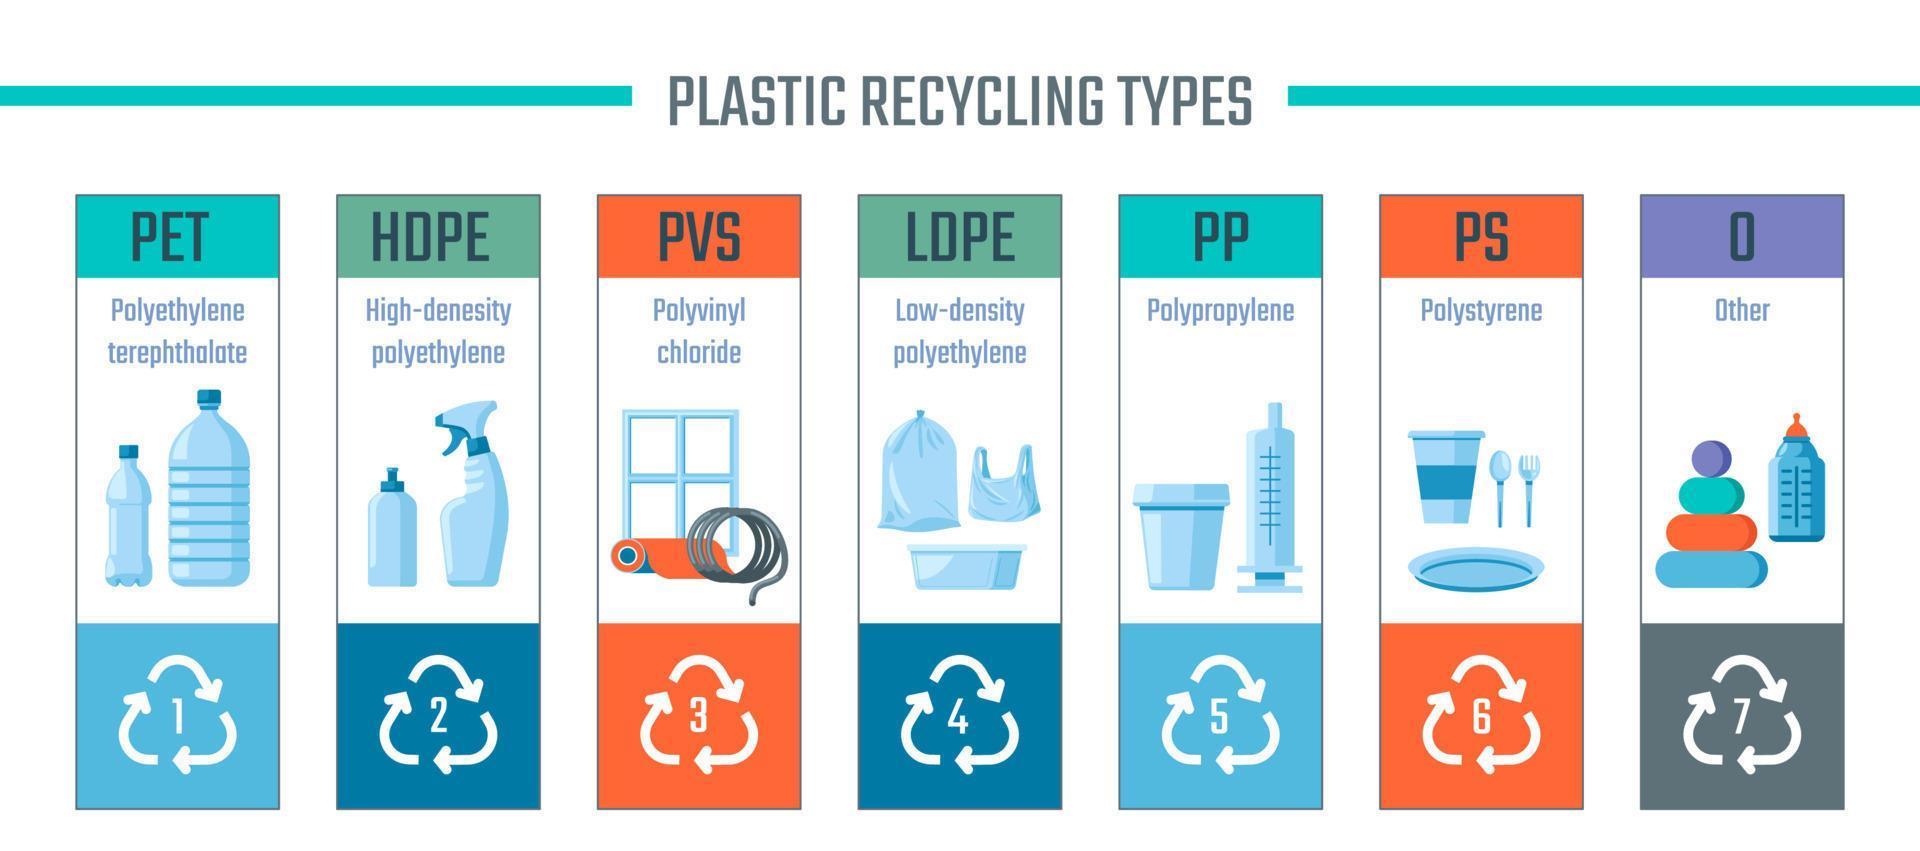 Plastic recycling types, labels kinds of bottles vector